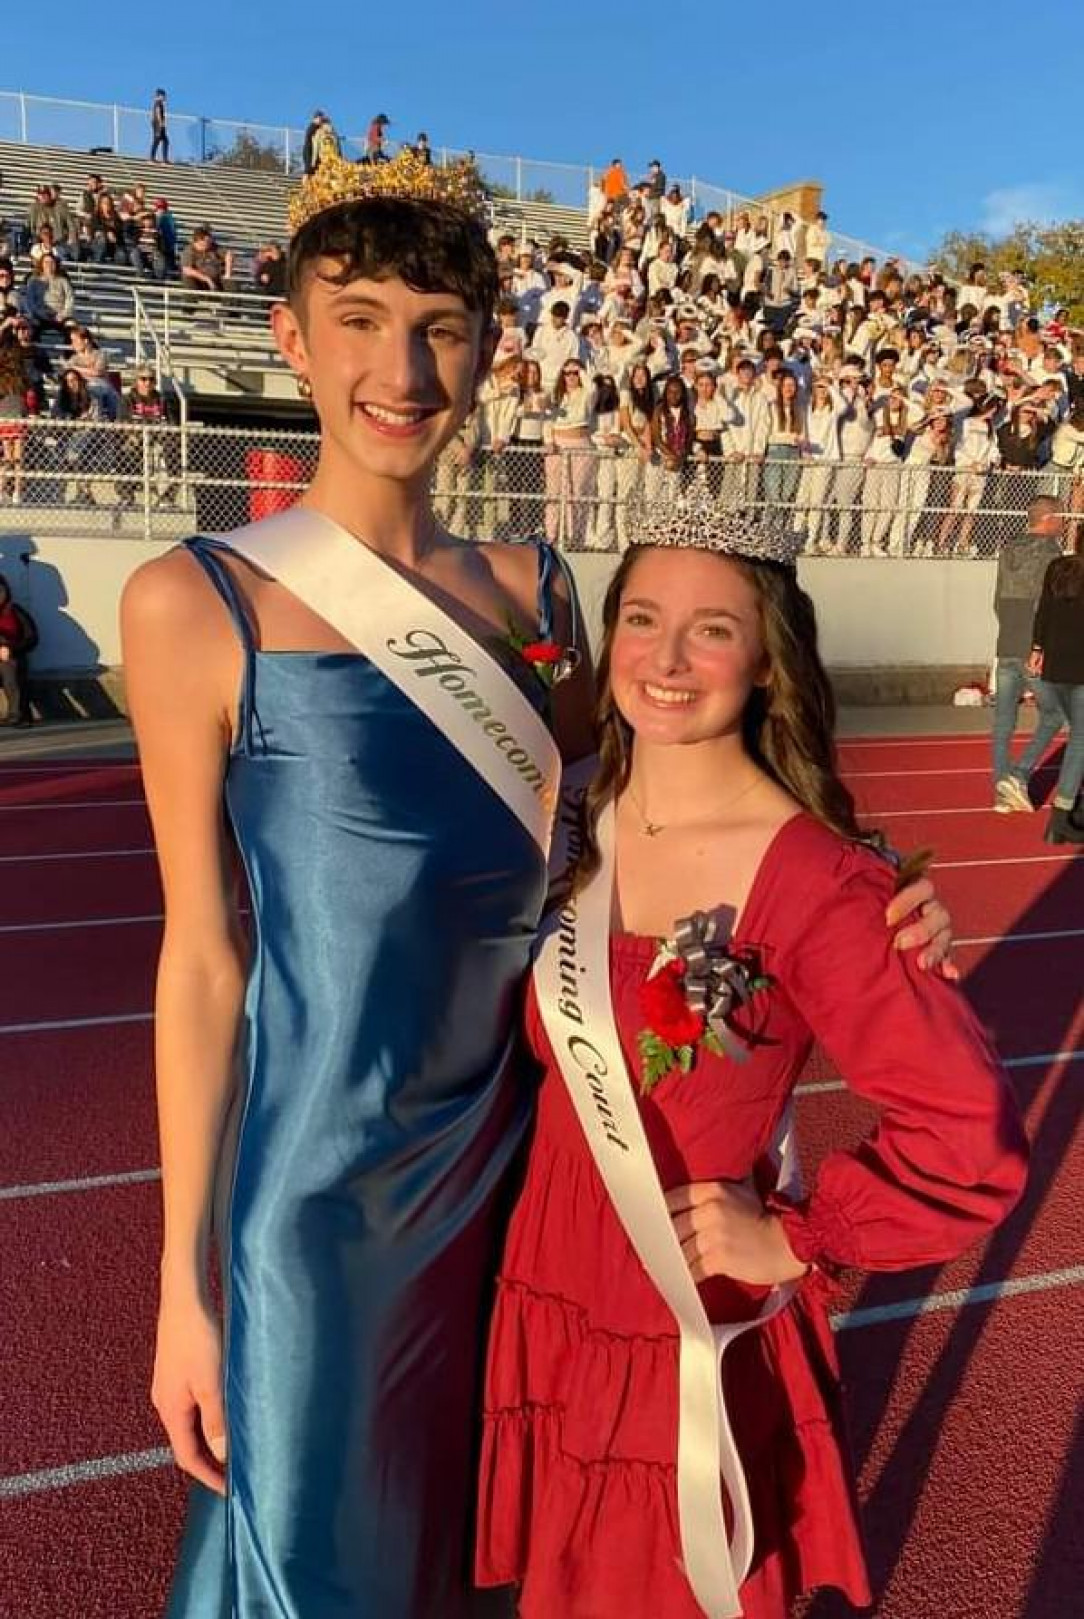 Trans Girl Elected Homecoming Princess as a Prank Chooses to Own It, Finds Support